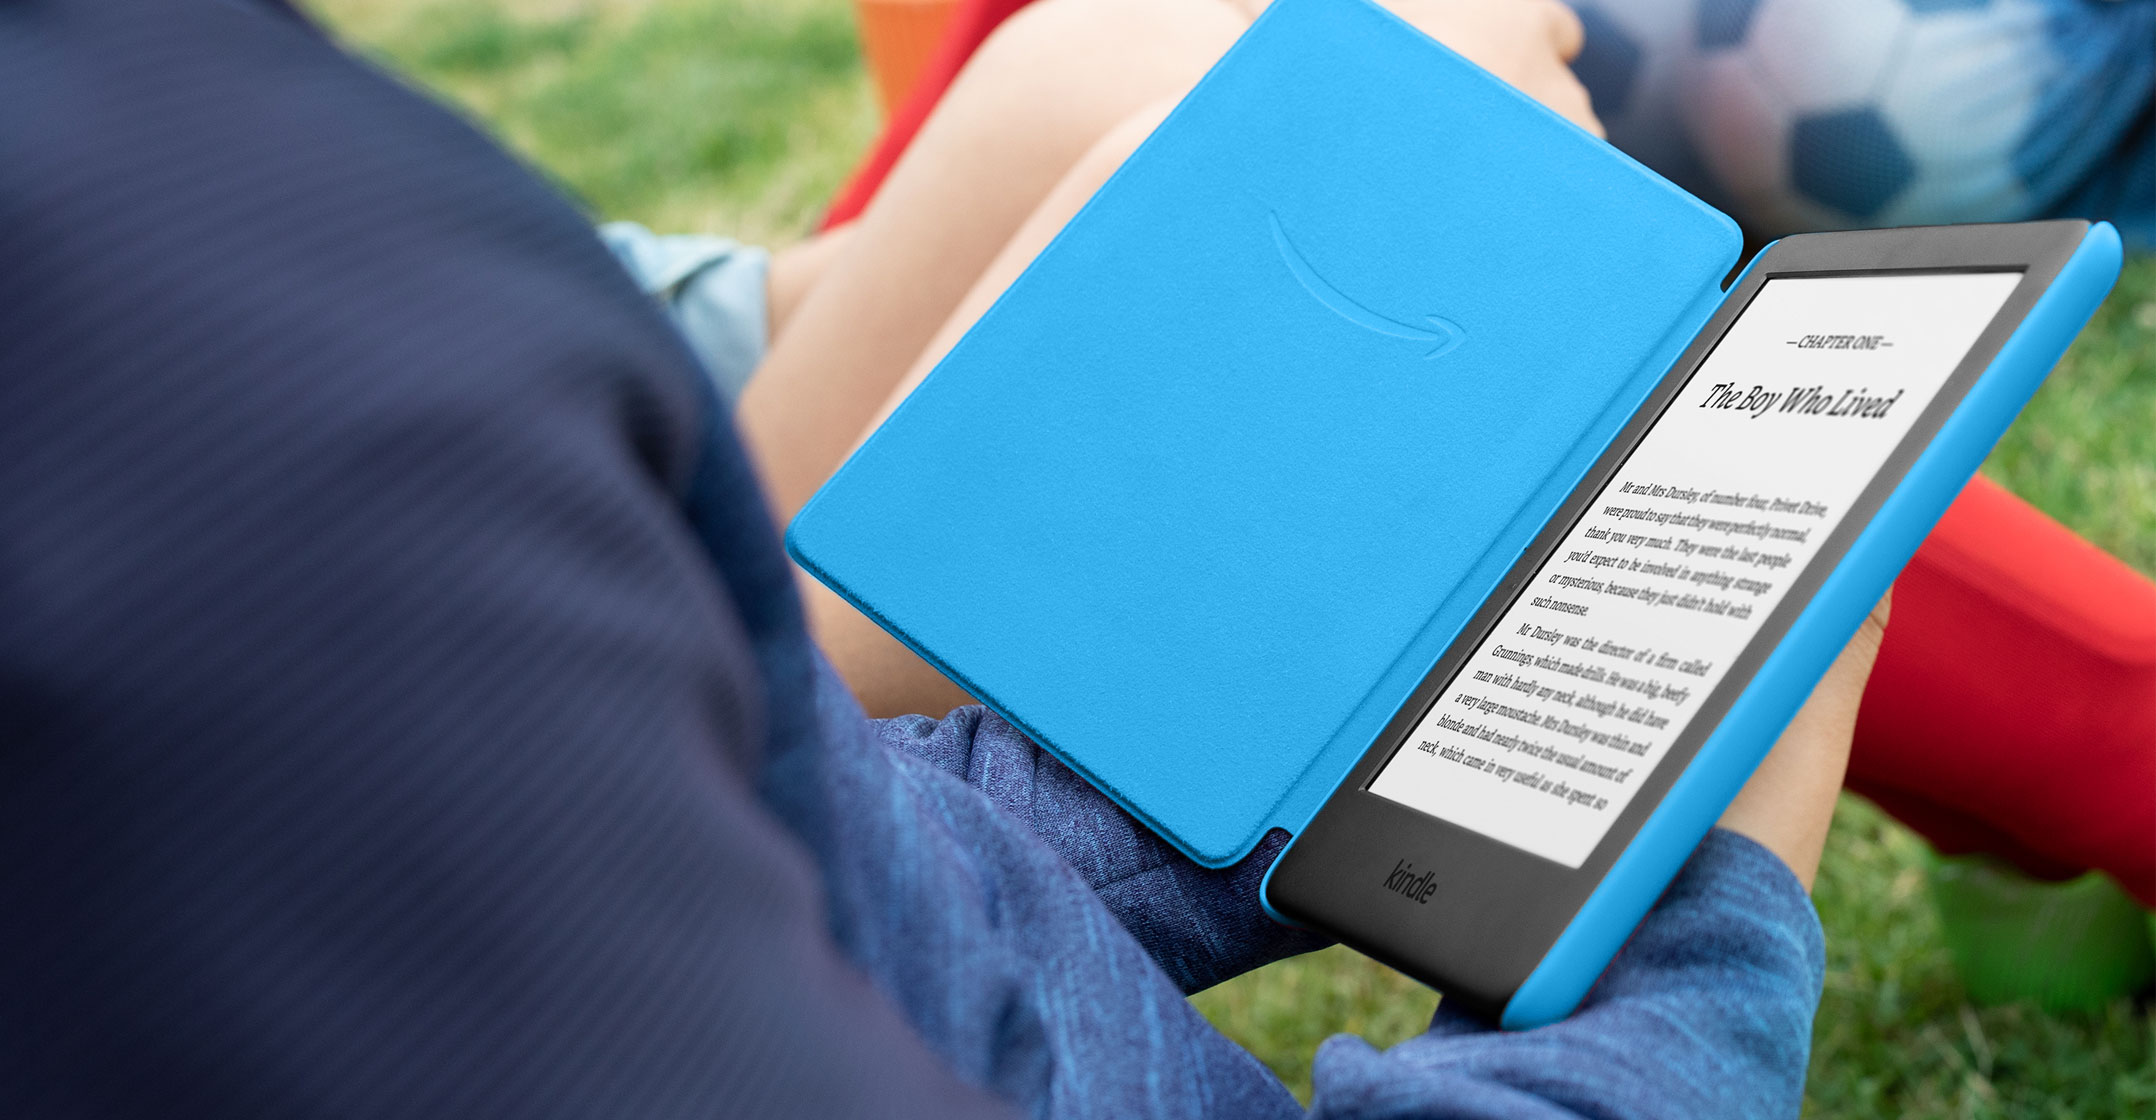 amazon kindle pc reader download